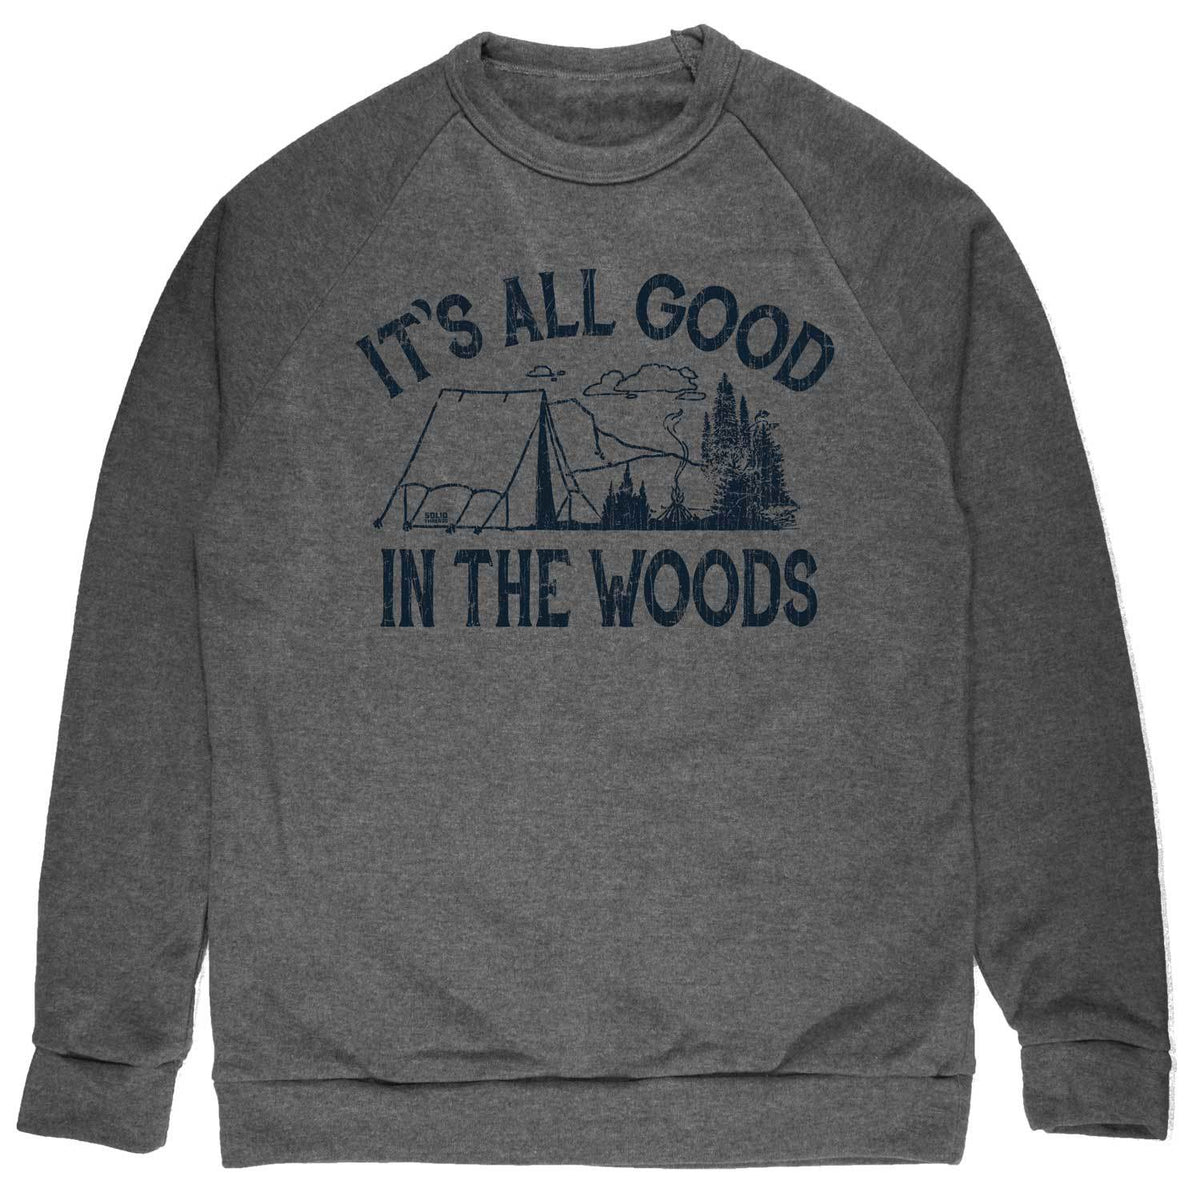 It&#39;s All Good In The Woods Vintage Inspired Fleece Crewneck Sweatshirt with cool camping graphic | Solid Threads